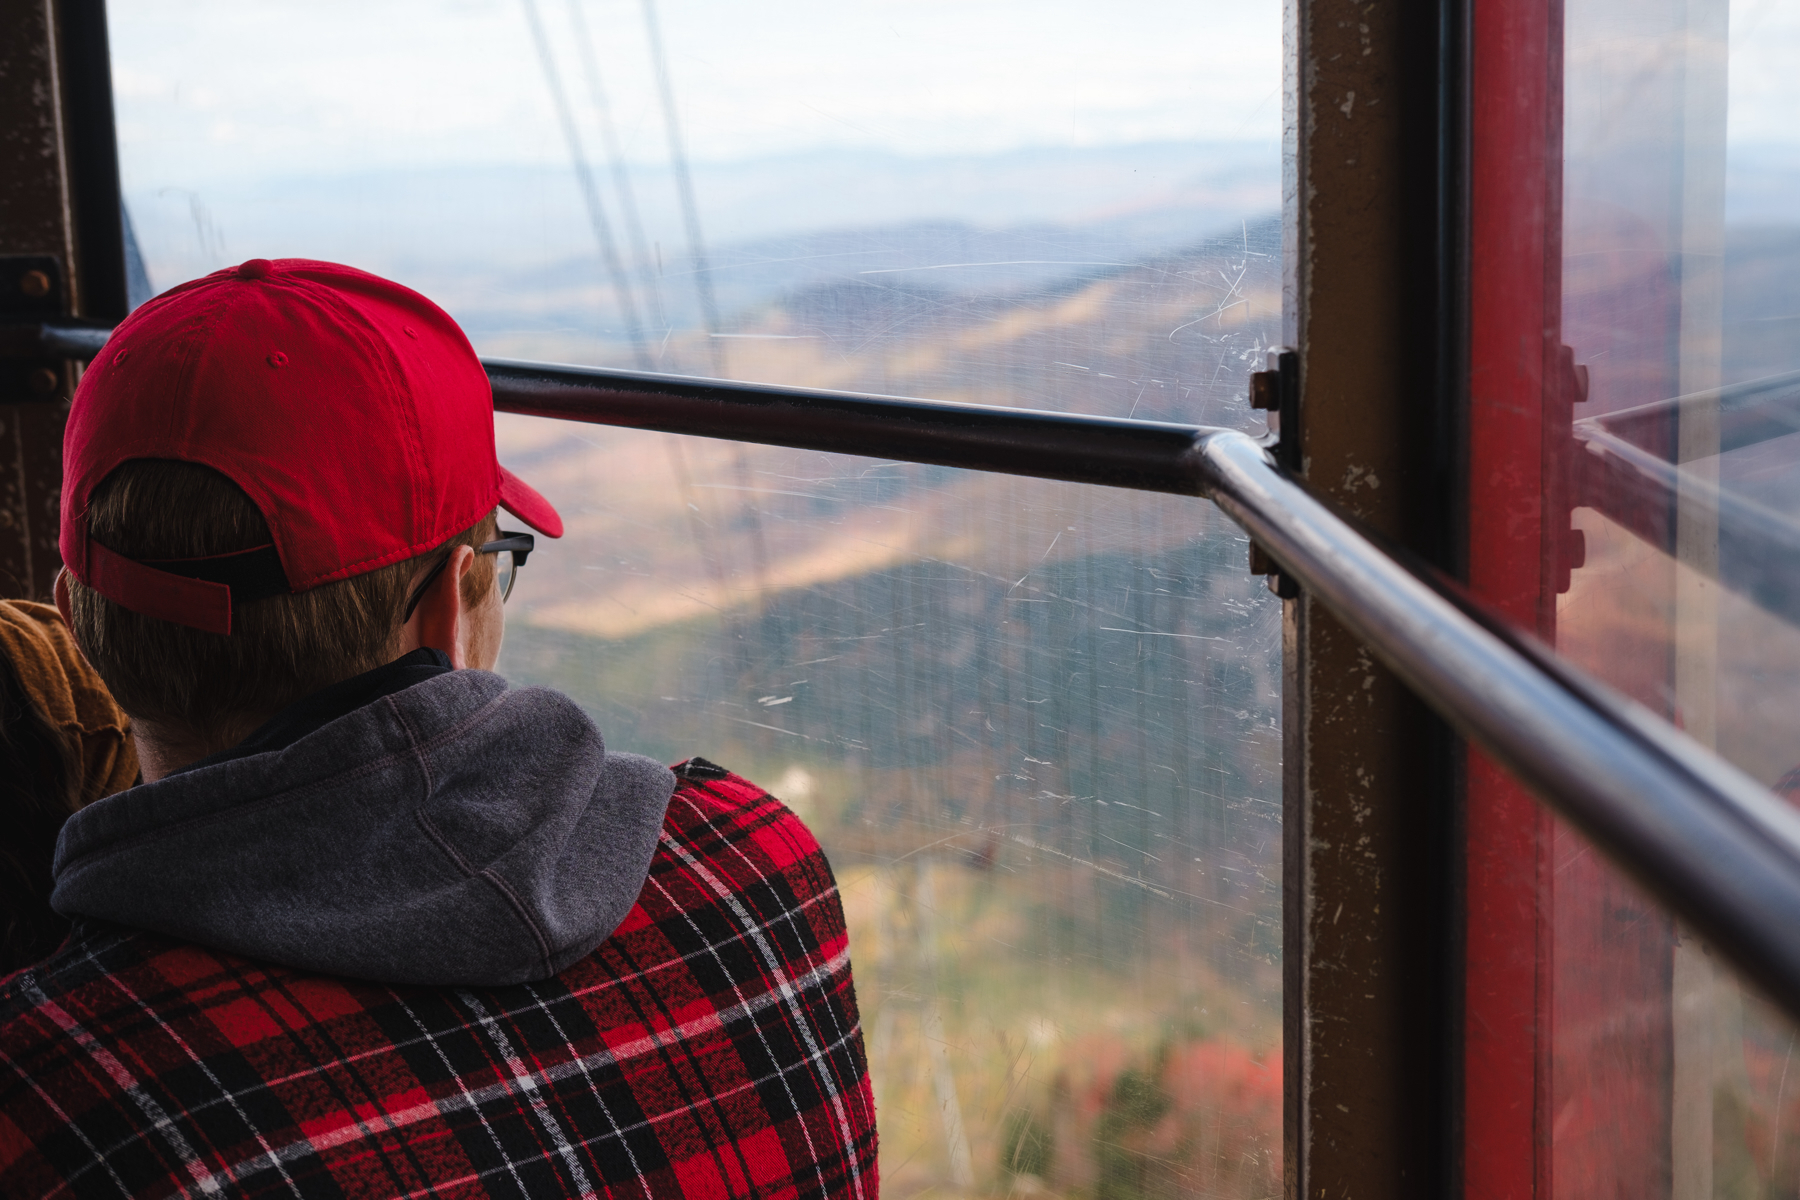 A person wearing a red baseball cap, a red flannel, and glasses looking out the window of a cable car with a scenic mountain landscape in the background.